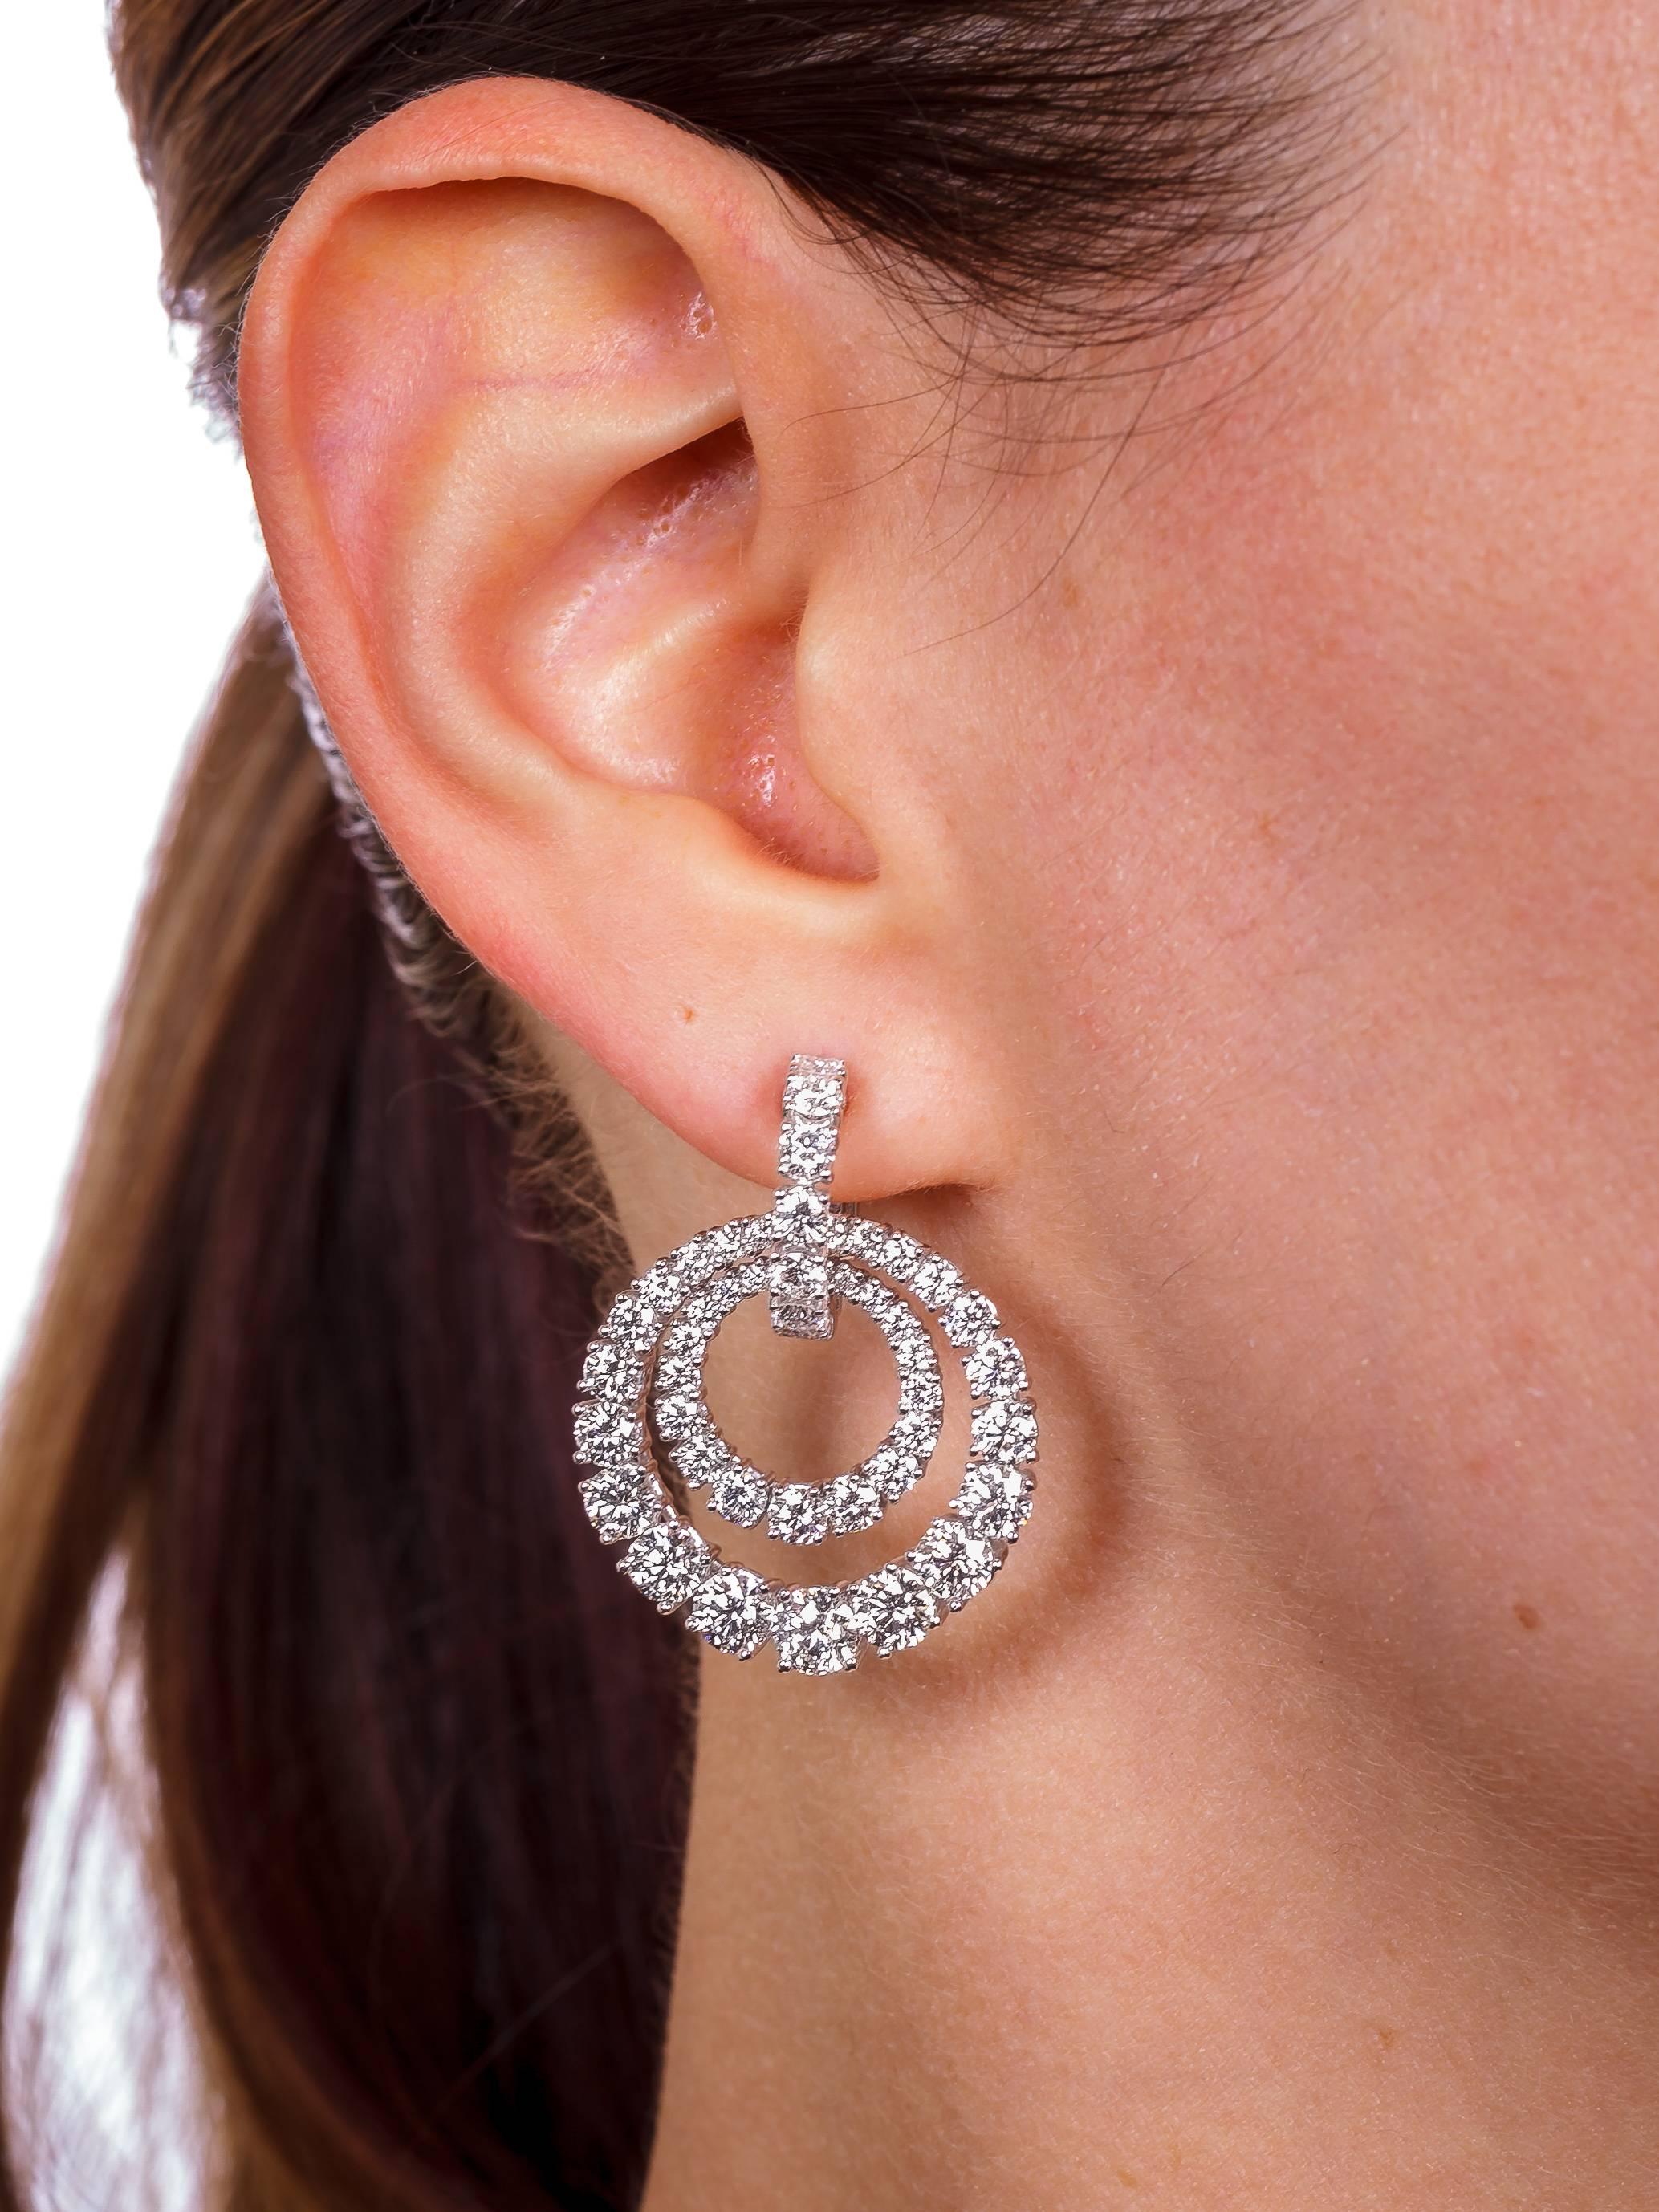 Chopard Diamond Earrings 18k White Gold and 9.40 ct. Round Brilliant Diamonds  In New Condition For Sale In Houston, TX